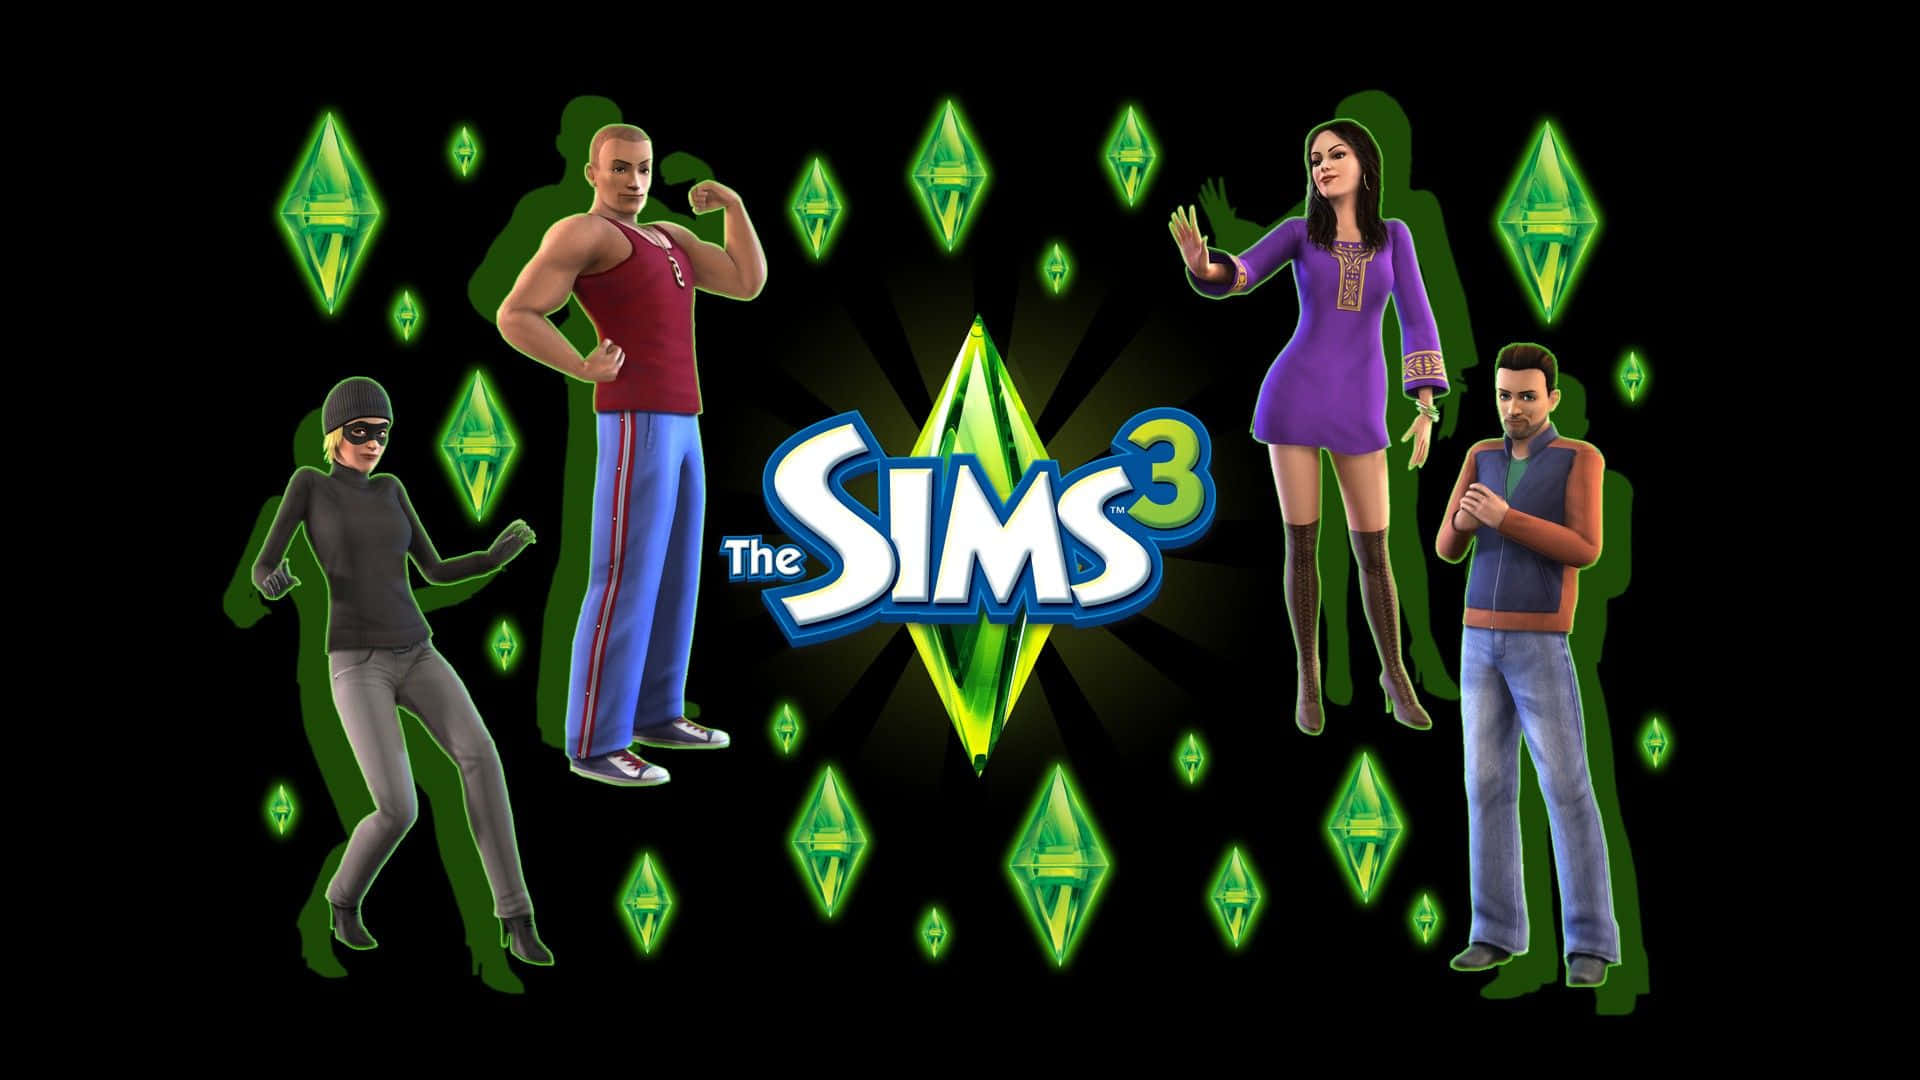 The Sims 3 Logo With People In Front Of It Wallpaper